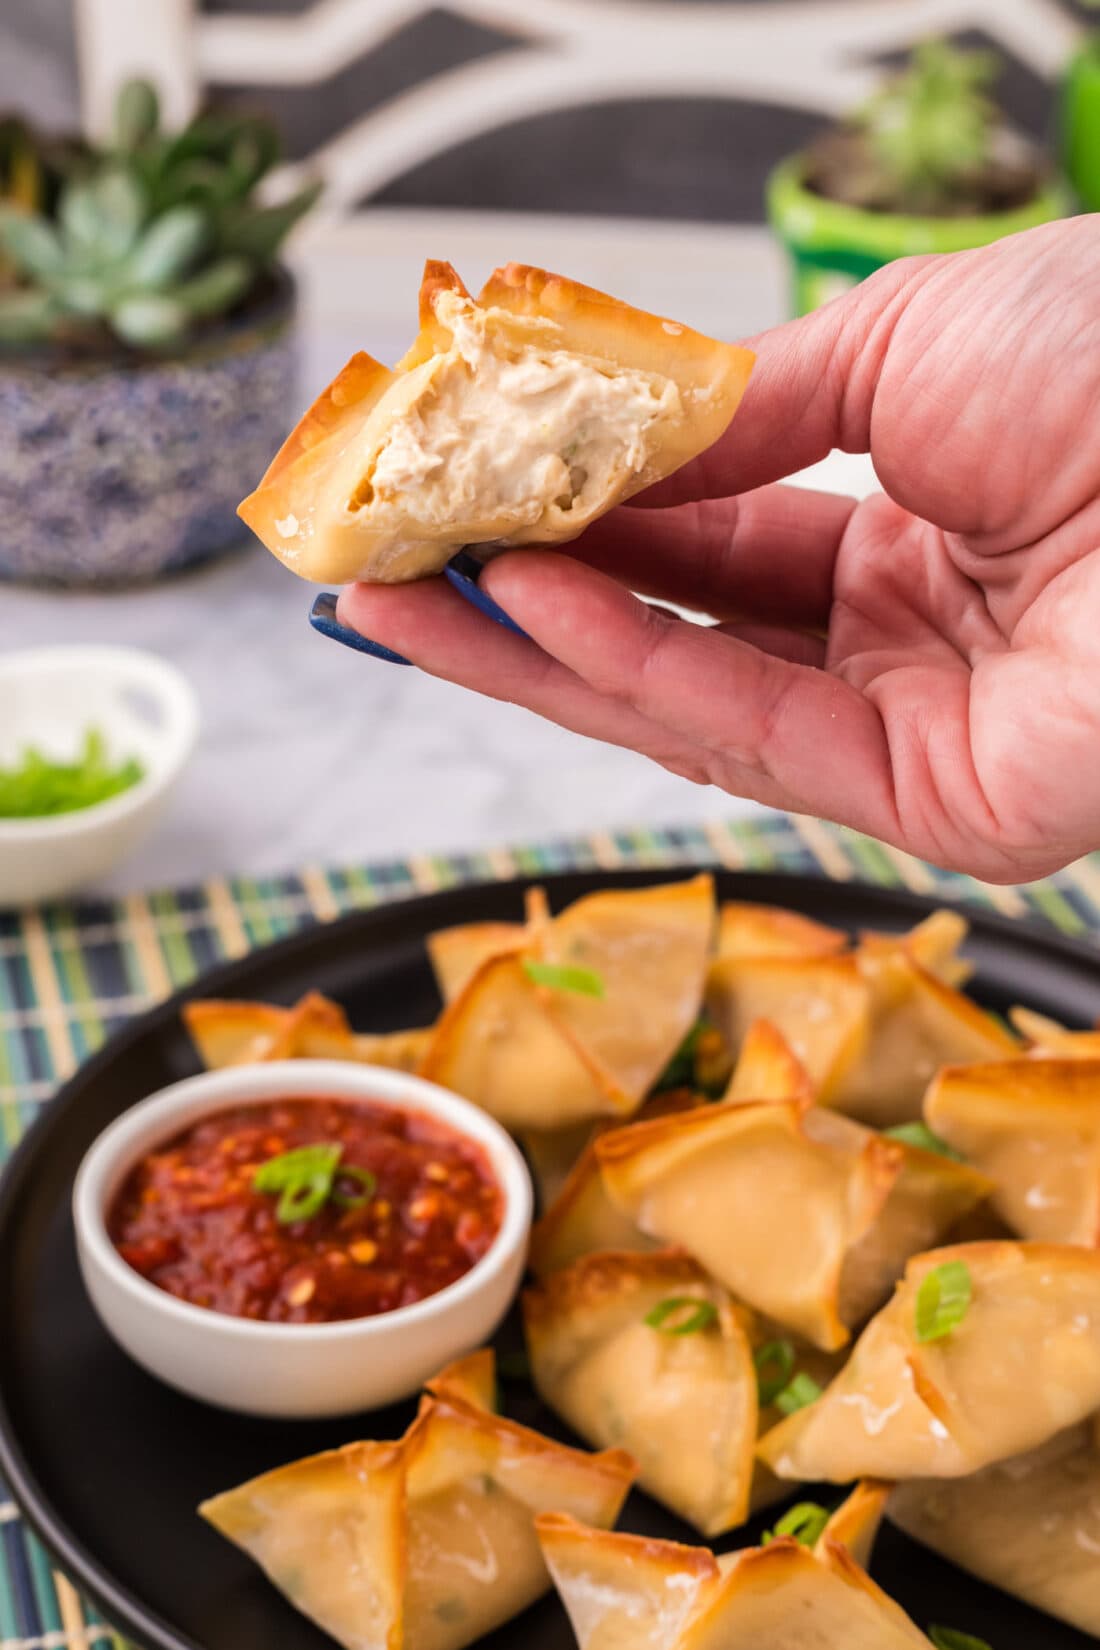 Hand holding up half of a Crab Rangoon showing the inside filling